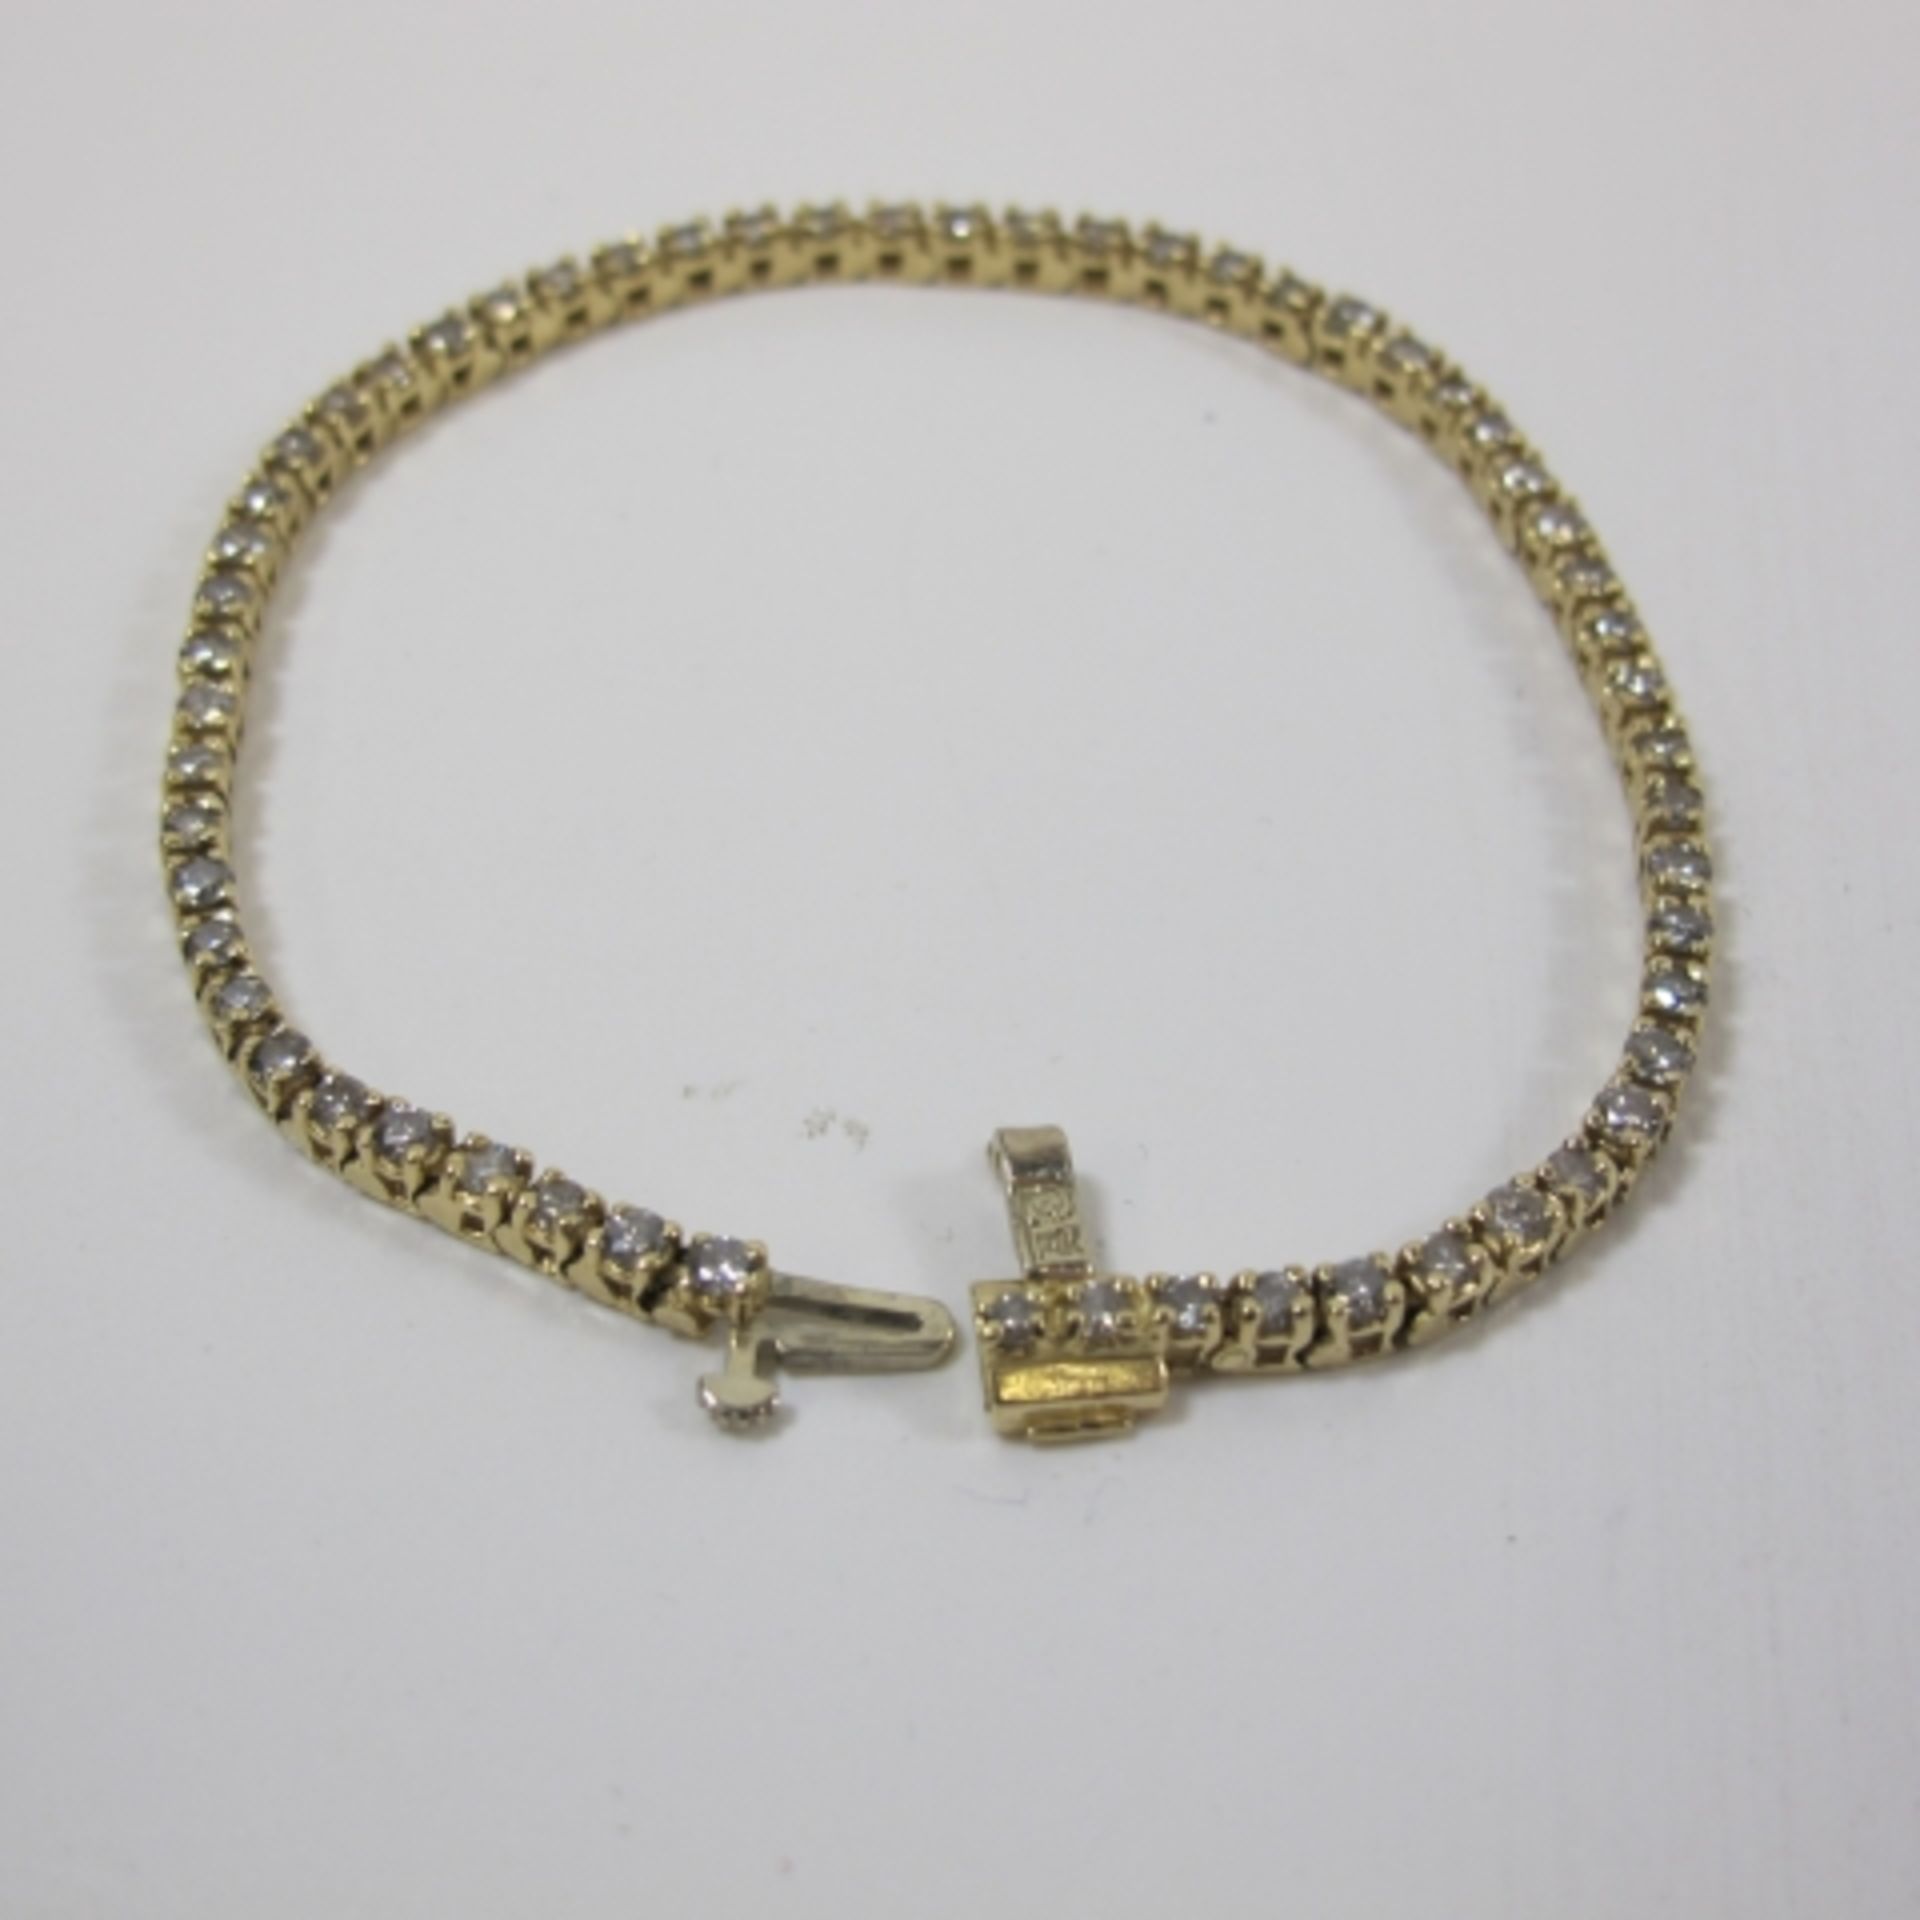 A 14K gold bracelet set with fifty eight diamonds (approximately three carats) (est. £350-£500) - Image 3 of 3